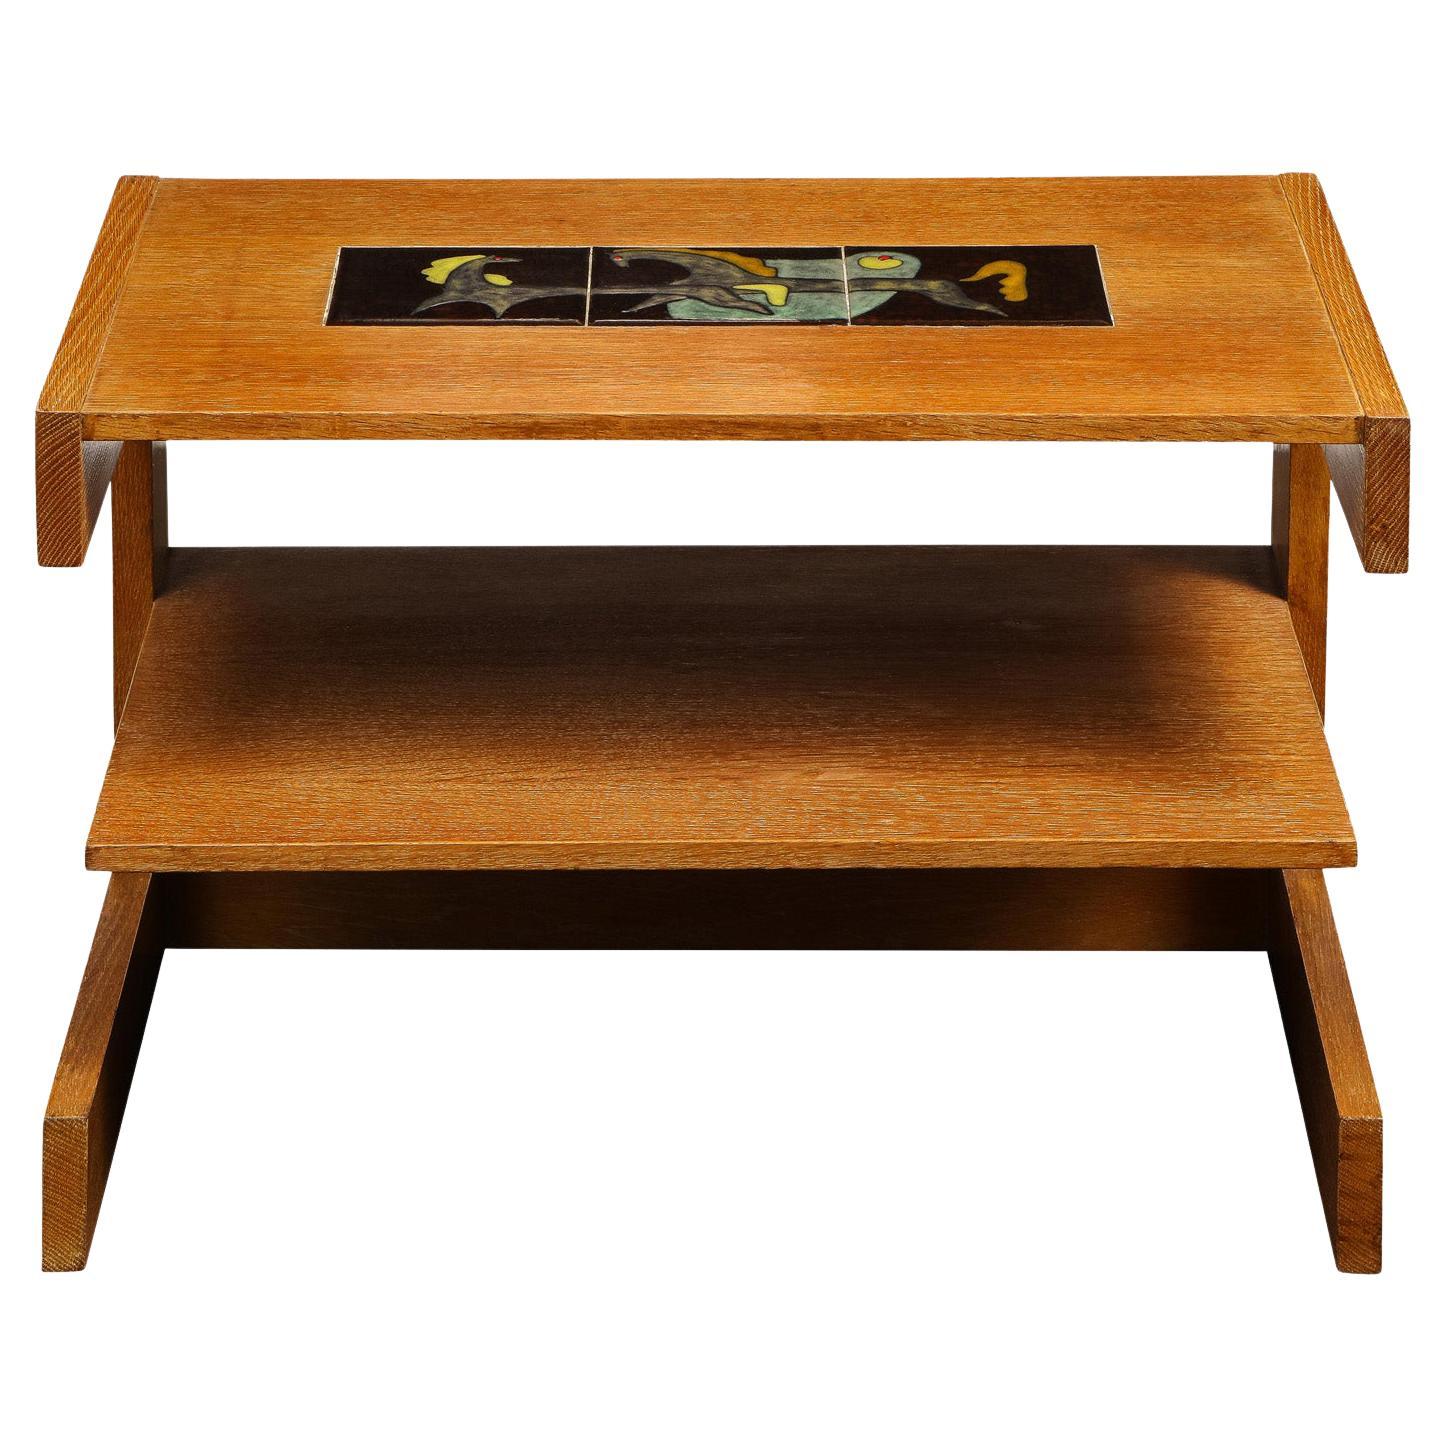 Vladimir Kagan 2-Tier Side Table with Inset Ceramic Tile Top 1950 'Signed' For Sale